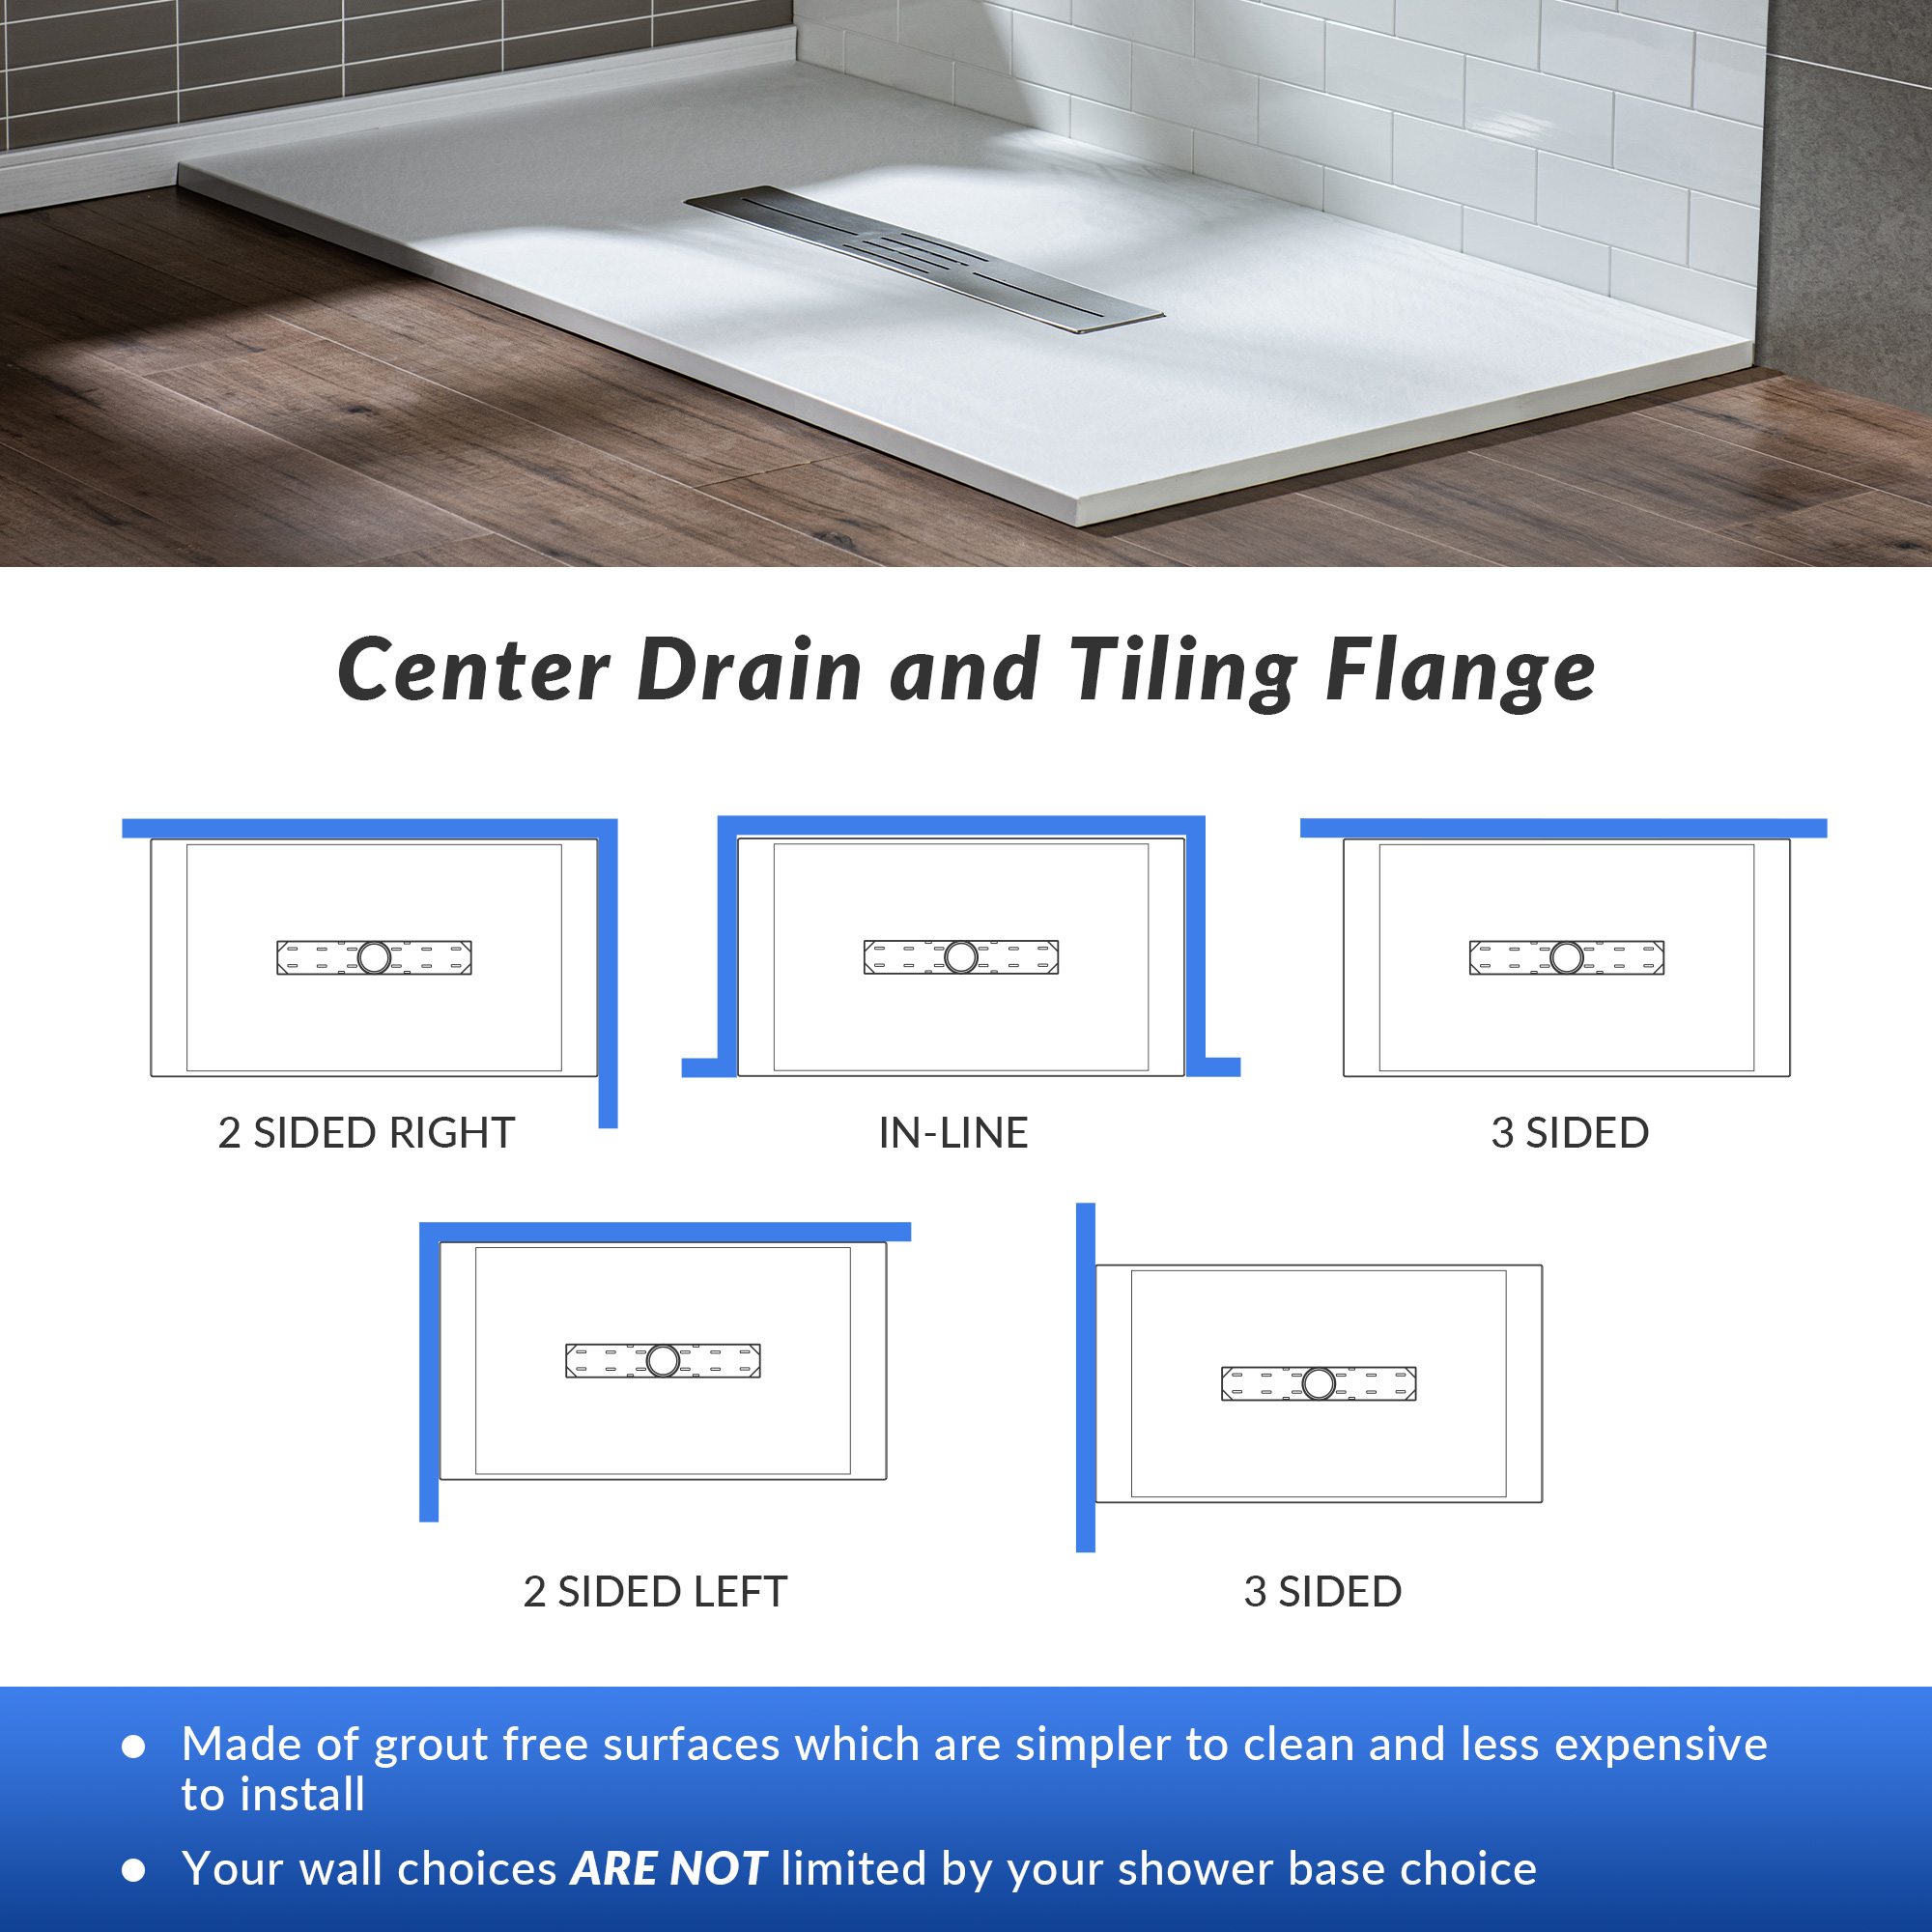  WOODBRIDGE 60-in L x 32-in W Zero Threshold End Drain Shower Base with Center Drain Placement, Matching Decorative Drain Plate and Tile Flange, Wheel Chair Access, Low Profile, White_15110